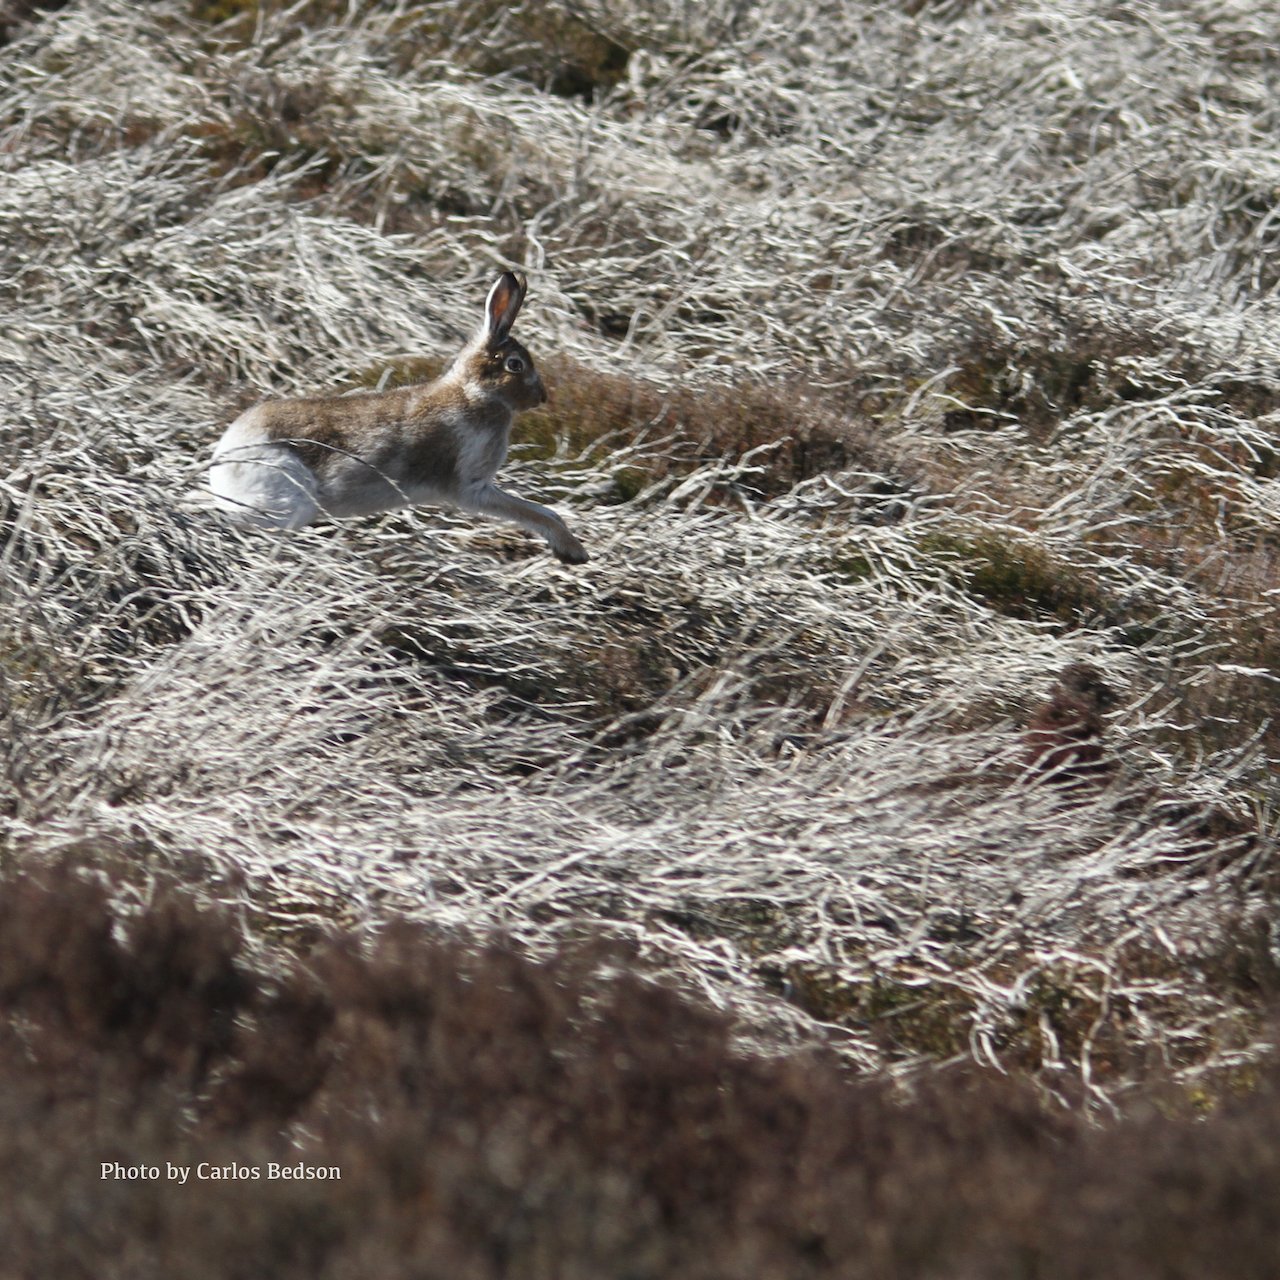 Nature Tripping Episode 20 - The Mountain Hare